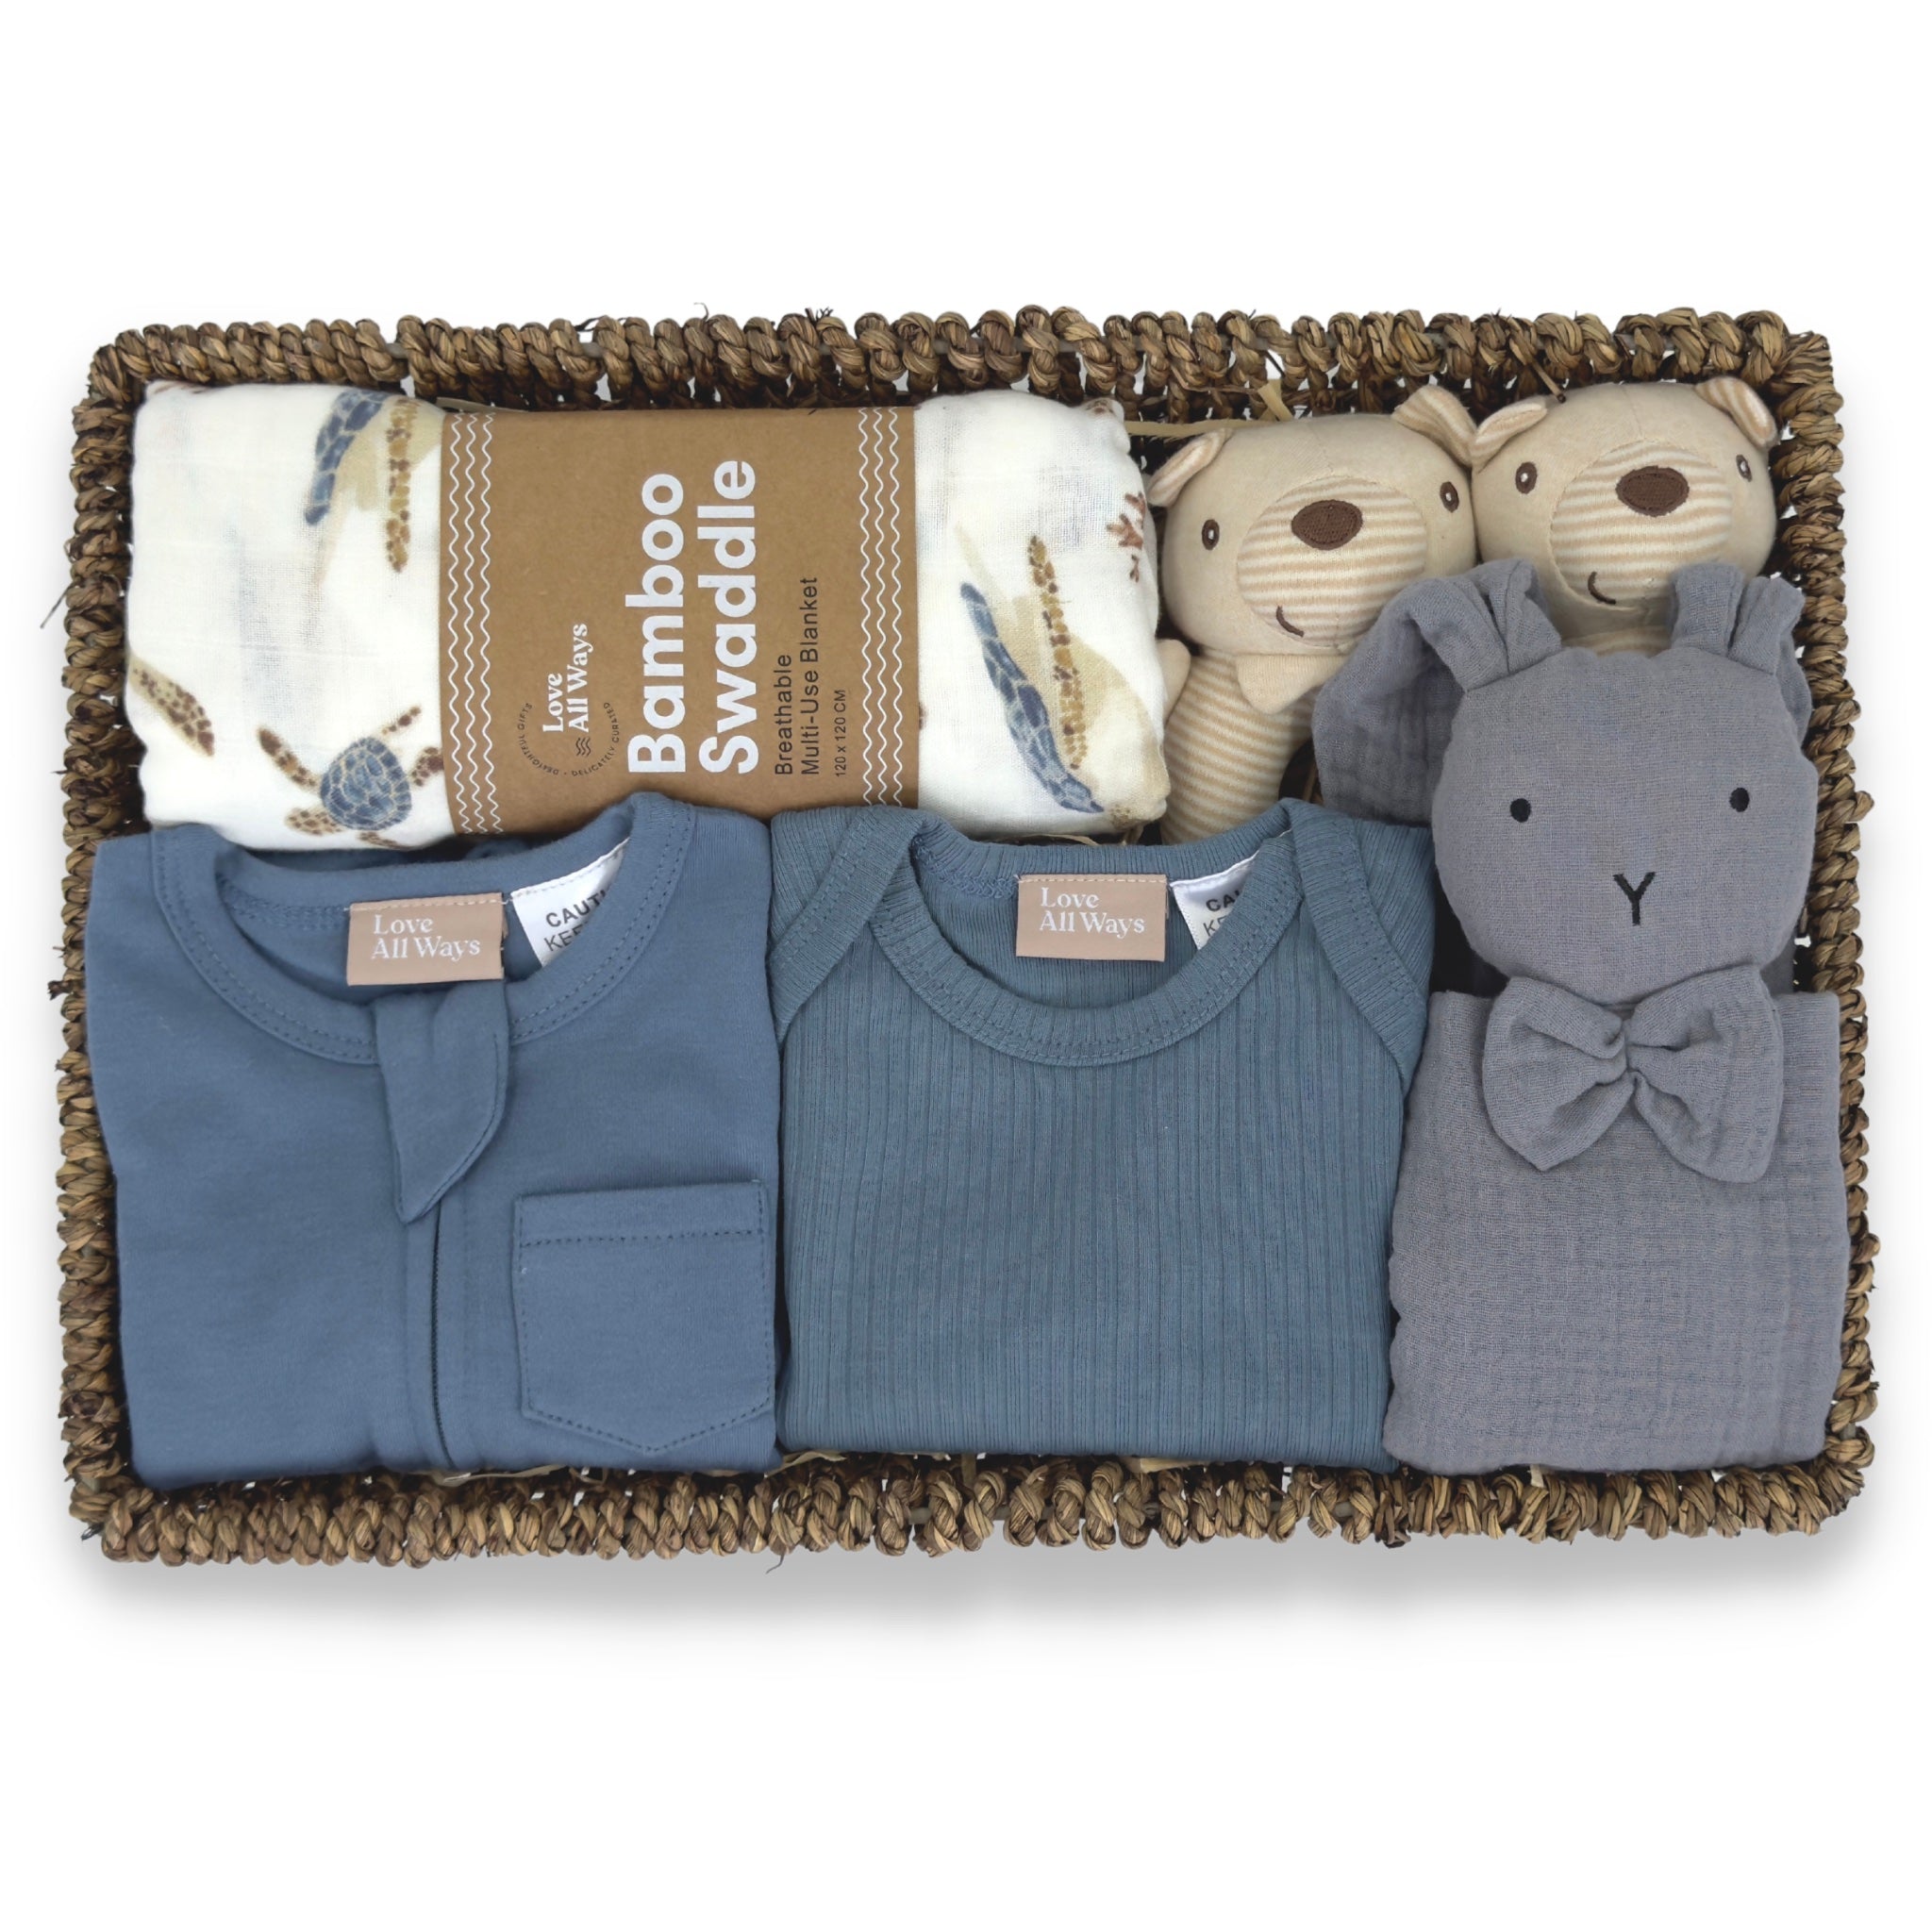 Explore our Signature Organic Baby Boy Gift Basket – the epitome of Love All Ways' commitment to ethical and sustainable values. Meticulously curated with essential core products for your little one's daily needs. Elevate your gifting experience with our thoughtful collection, beautifully packaged in a reusable seagrass display. Shop now!